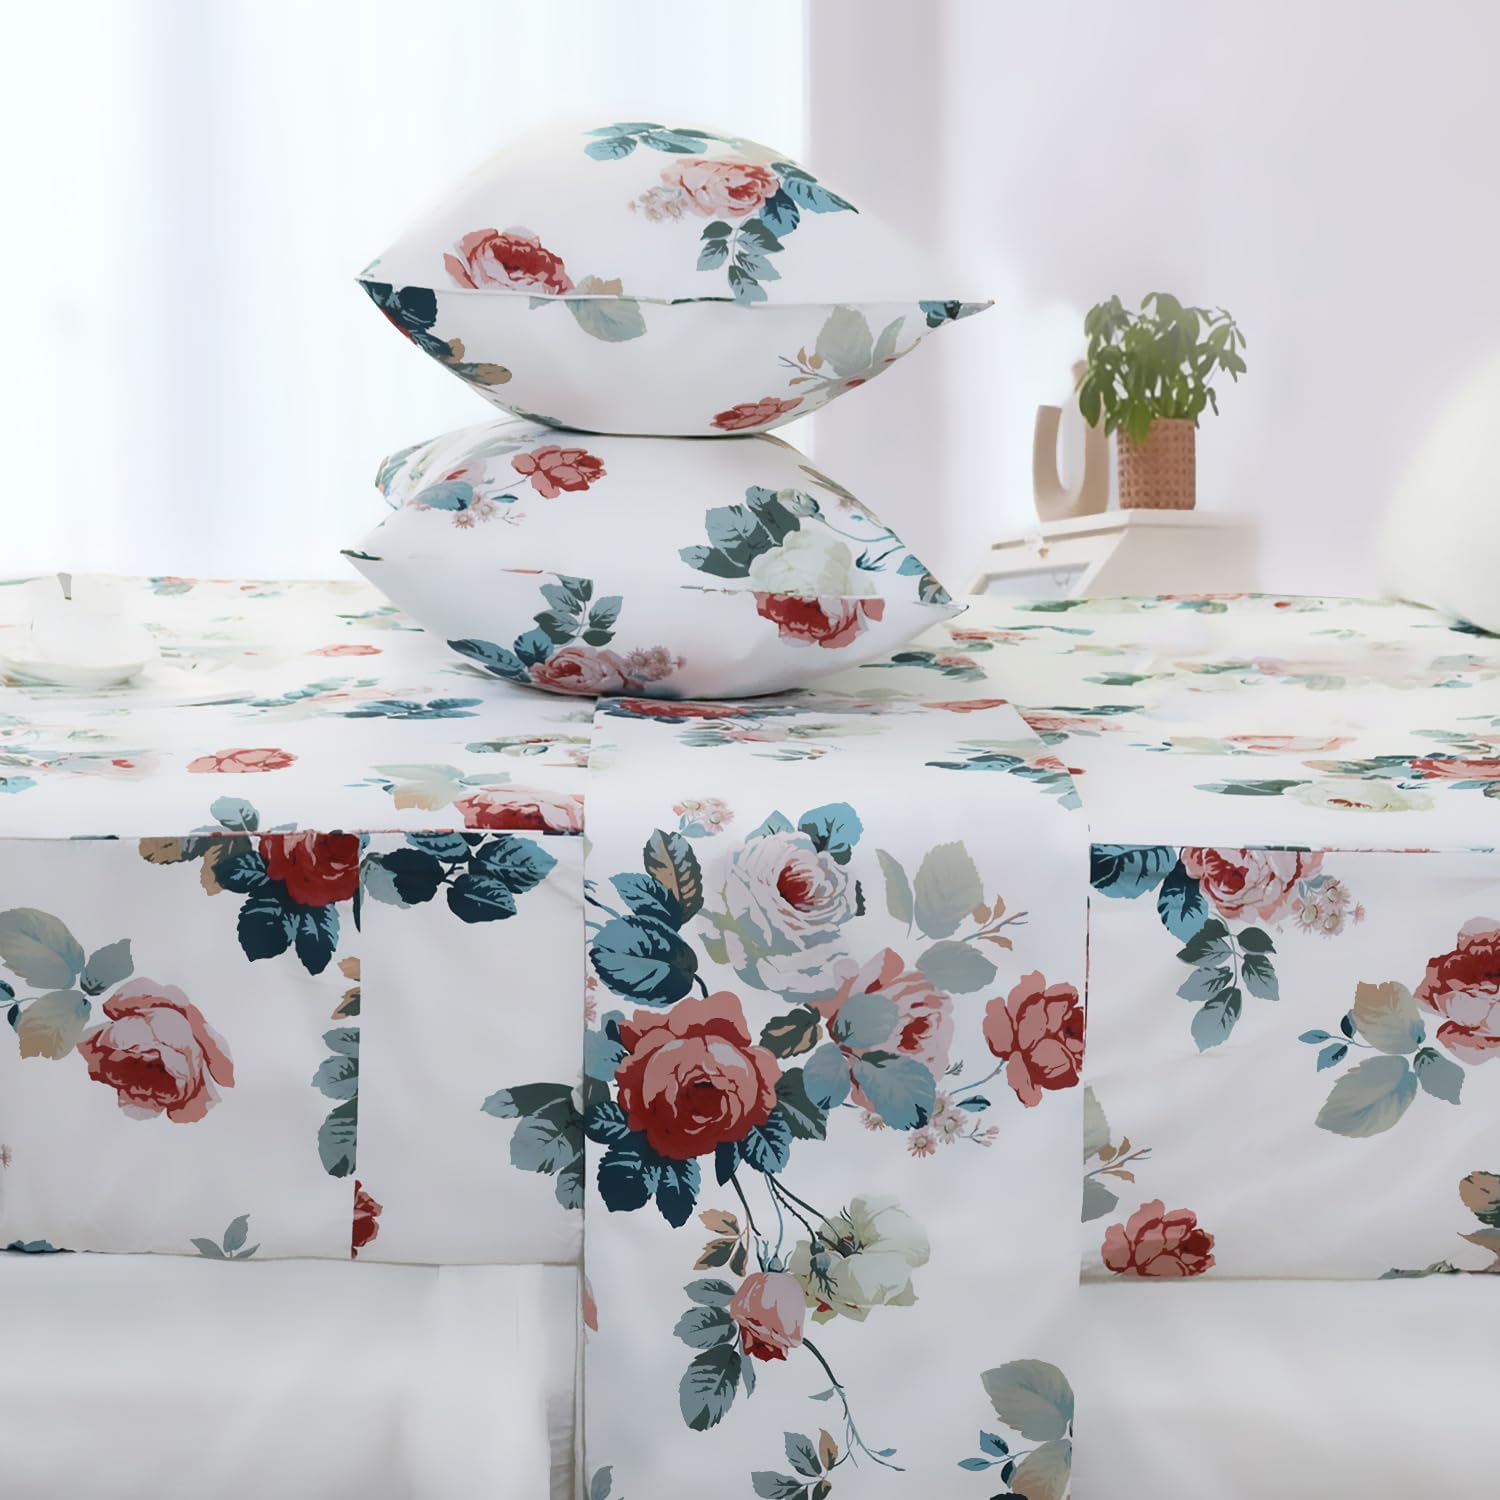 FADFAY Floral Cotton Sheets Queen 100% Cotton Flower Bed Sheets Pink White Dark Blue Leaf Print Shabby Vintage Sheet Set Chic Farmhouse Bedding Soft Crisp Breathable Deep Pocket Fitted Sheet 4Pcs